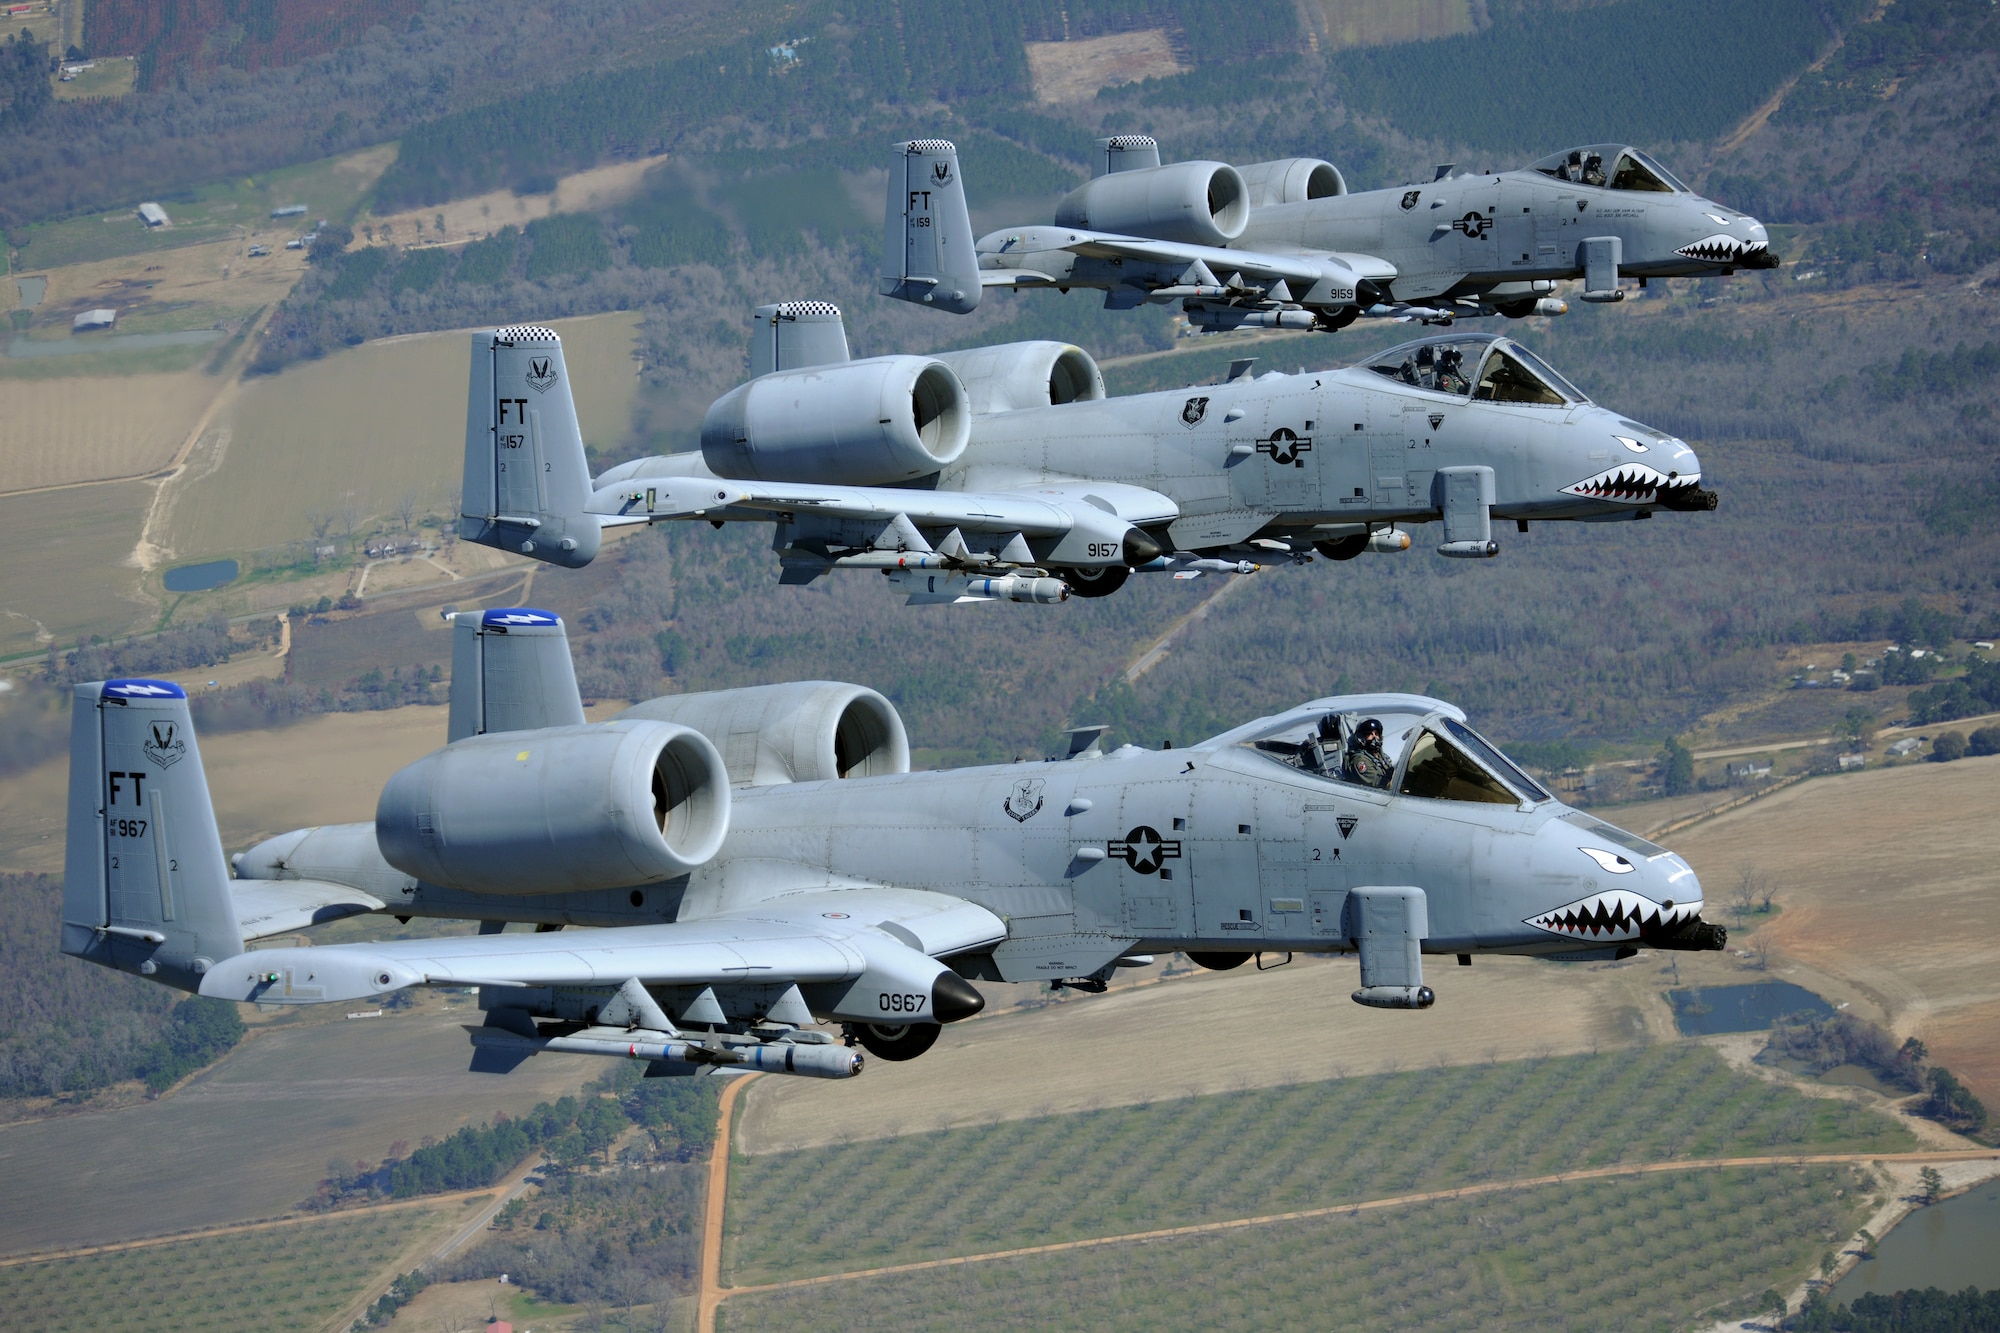 MOODY AIR FORCE BASE, Ga. -- Three A-10C Thunderbolt II aircraft from the 74th and 75th Fighter Squadrons fly in formation during a flight training session here March 16. The two combat-ready A-10C squadrons are part of Moody’s 23rd Fighter Group, the Air Force’s largest A-10C fighter group. (U.S. Air Force photo by Airman 1st Class Benjamin Wiseman/Released)